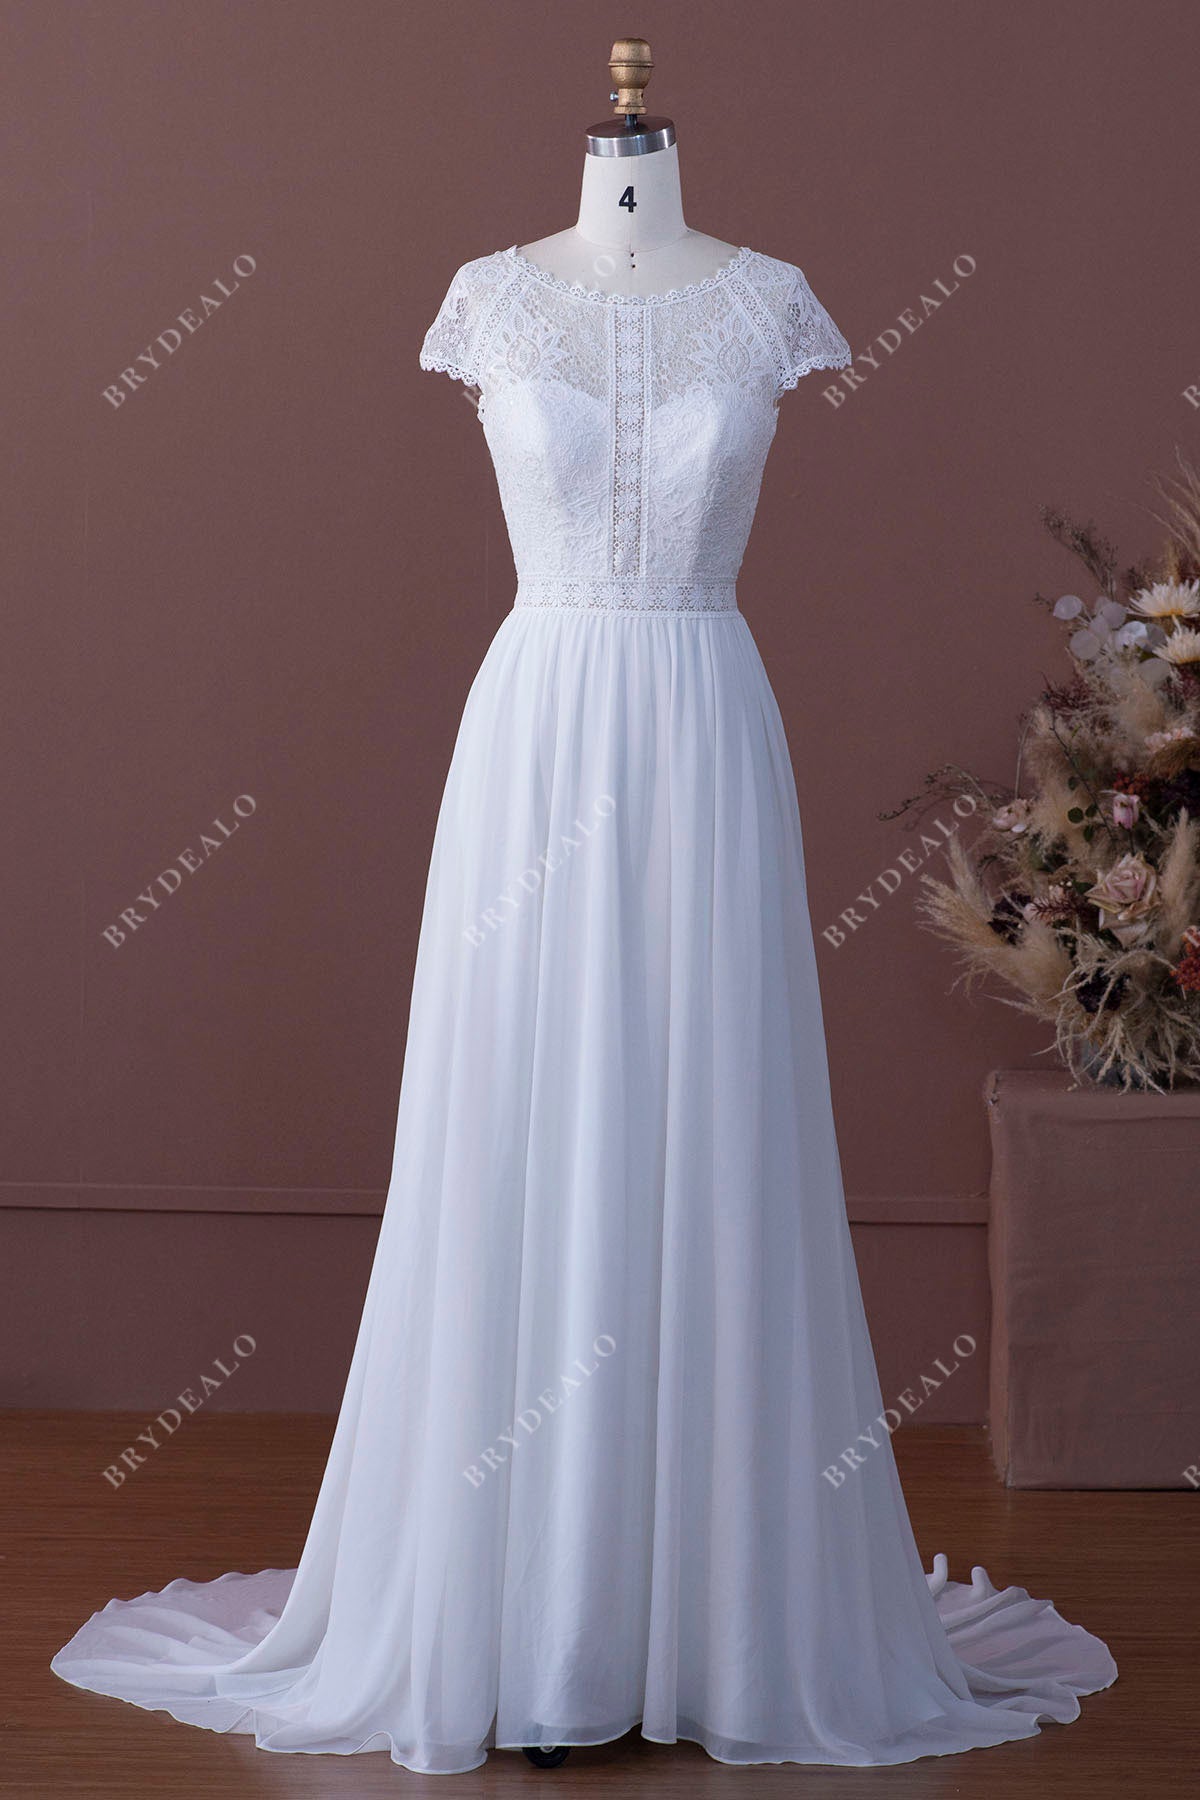 sheer cap sleeves lace chiffon A-line wedding gown